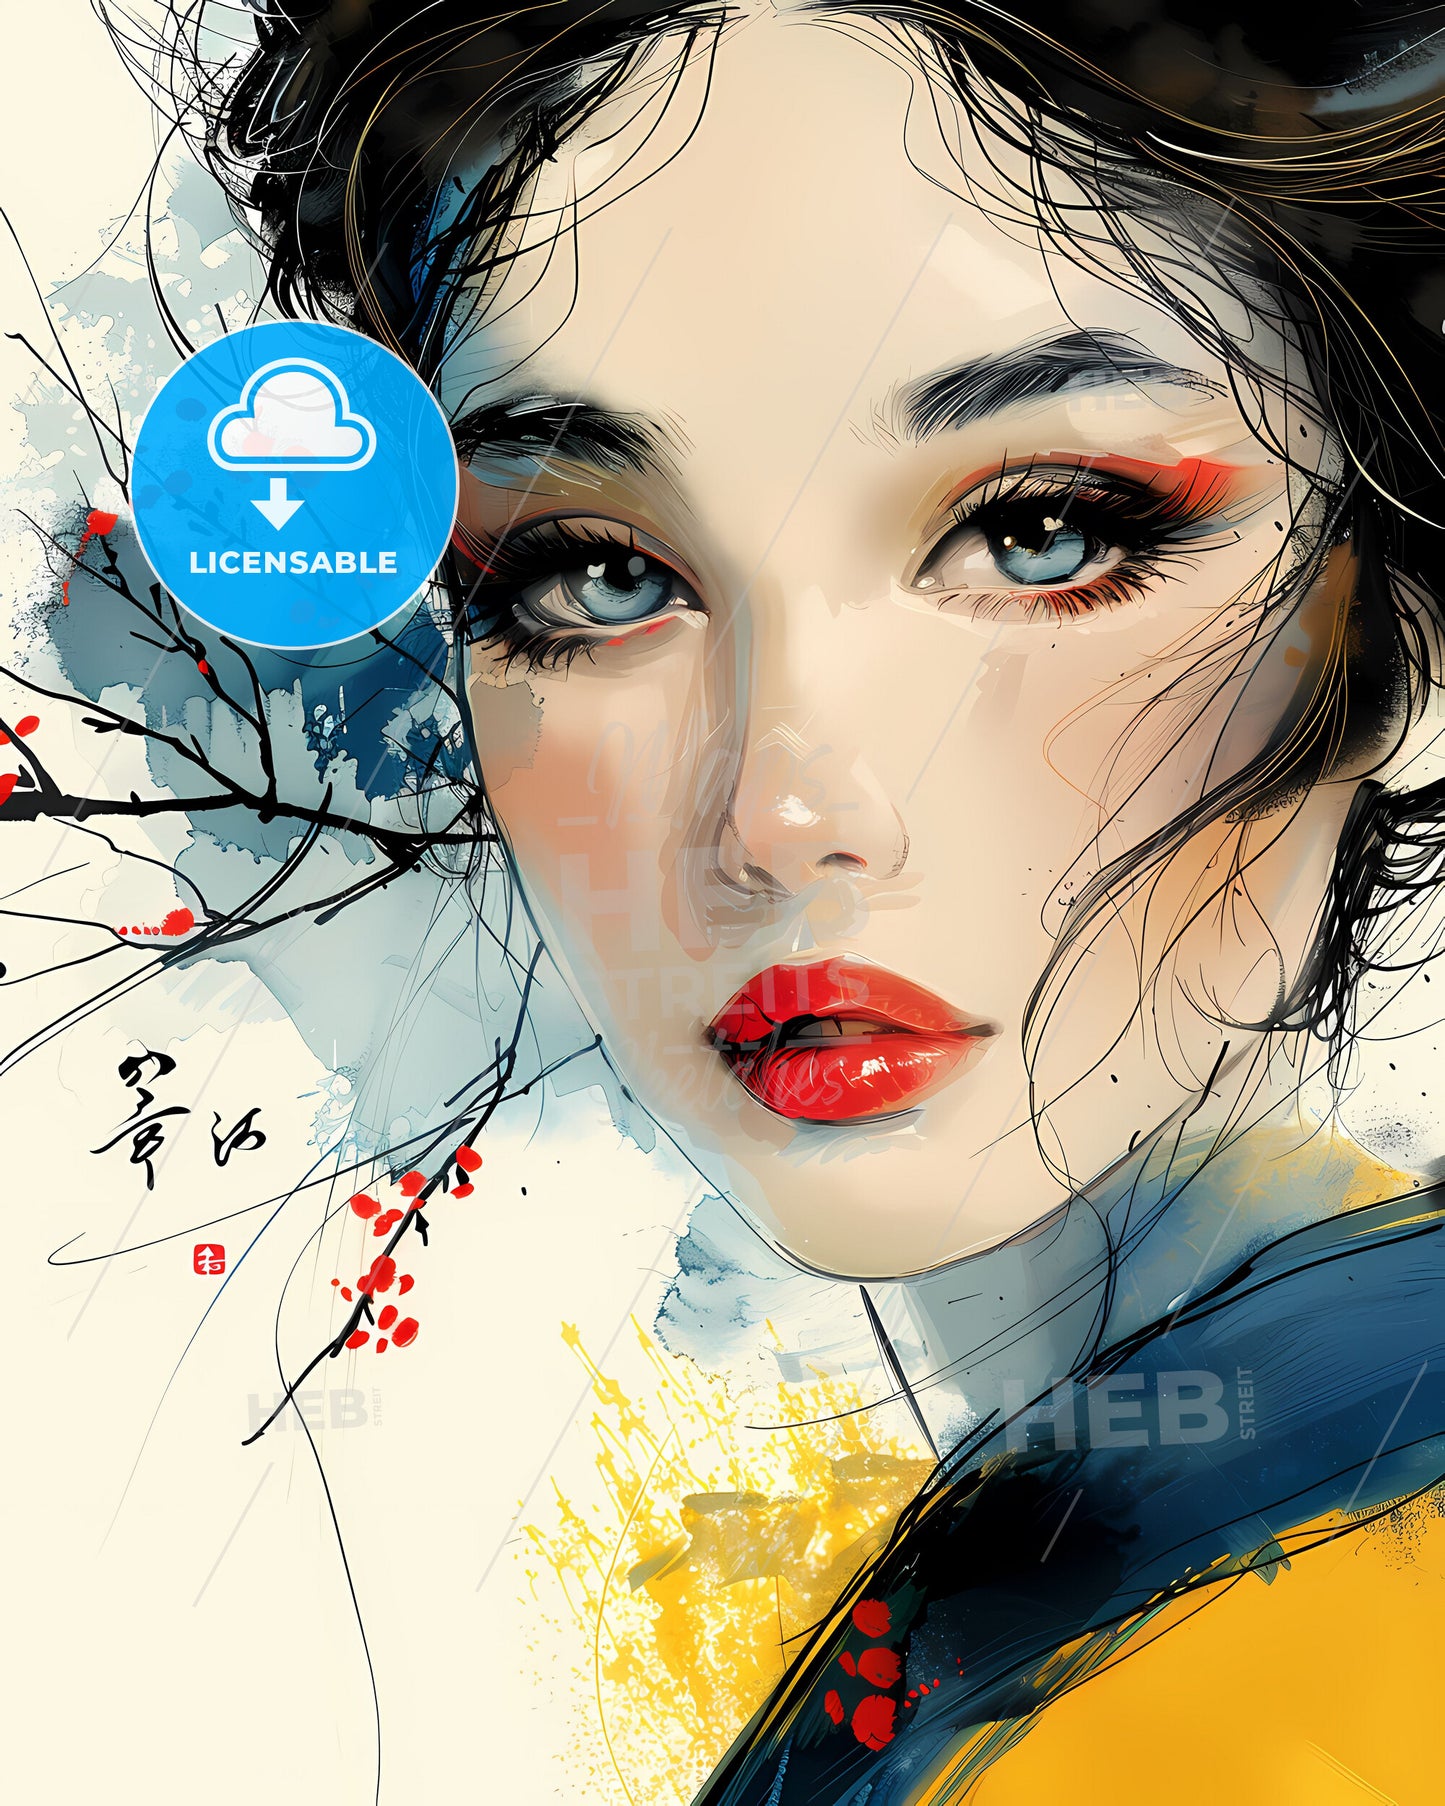 Seductive Feminine Orient-Style Painting With Blue Eyes, Red Lips, Delicate Lines and Vibrant Colors High Resolution